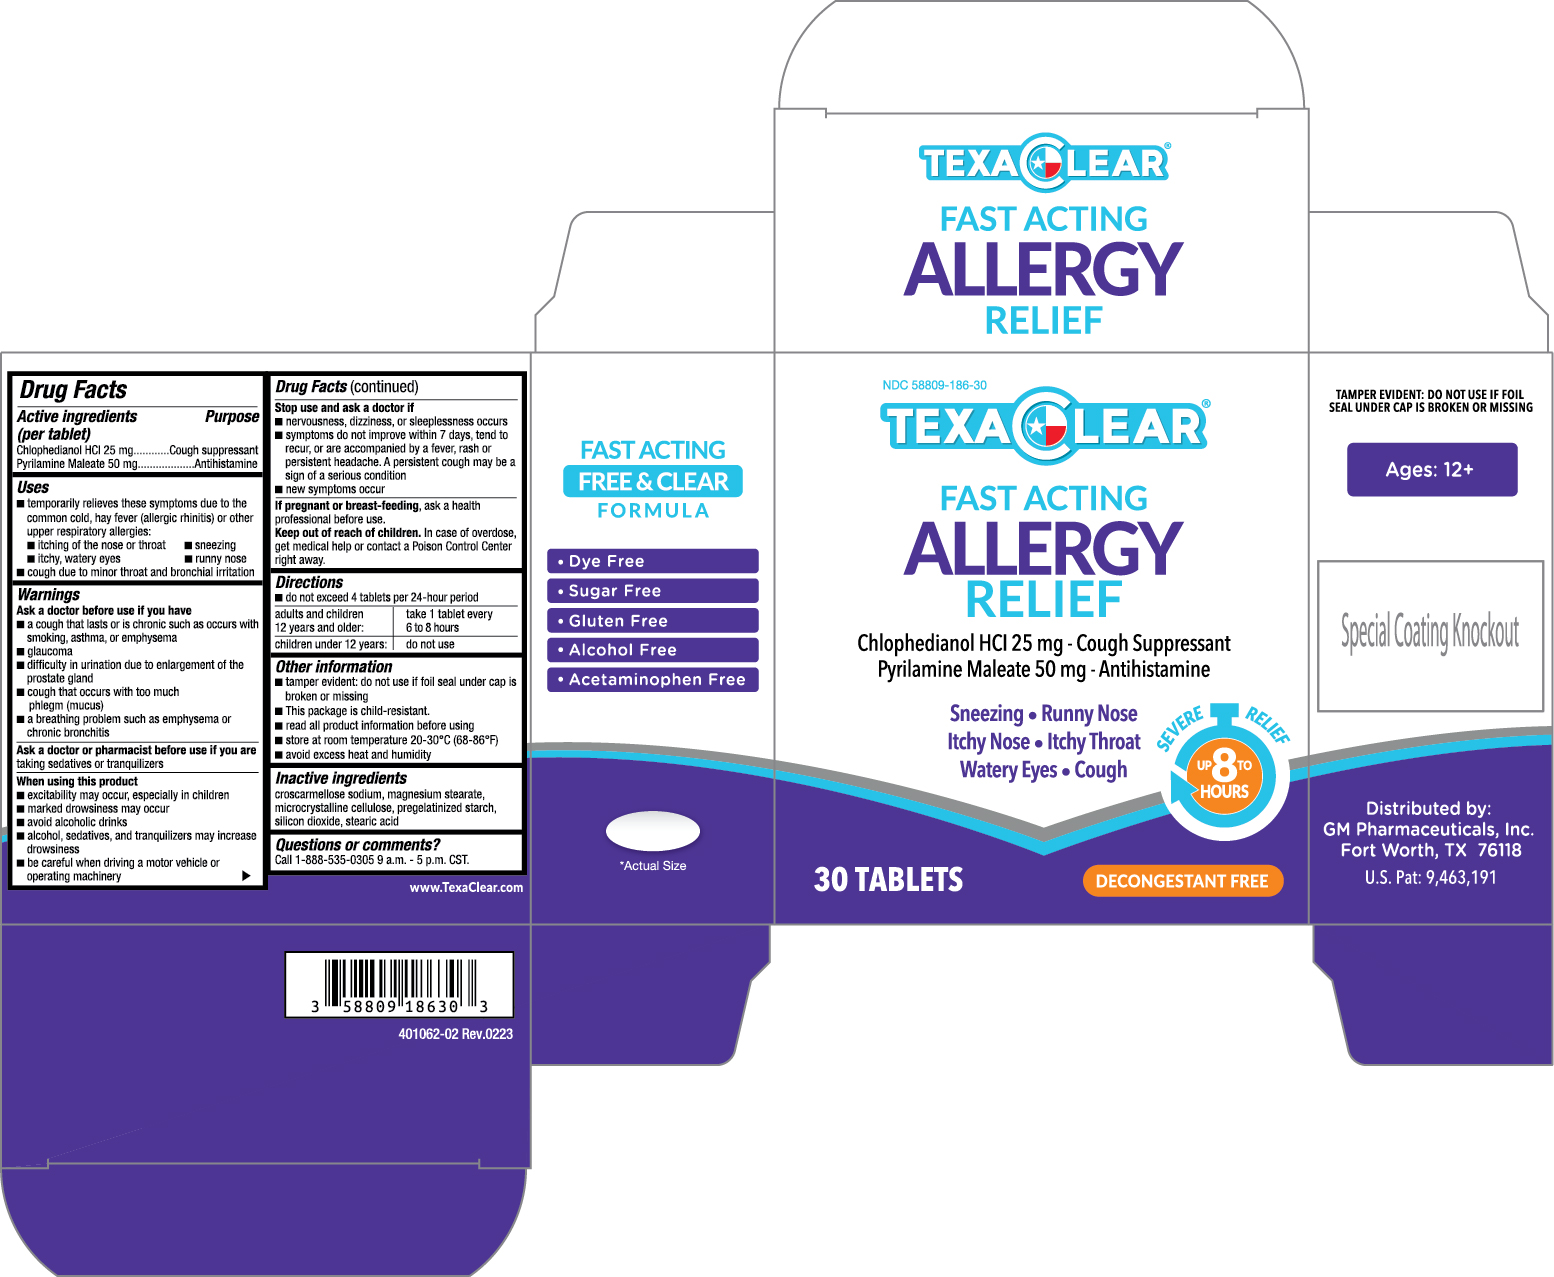 TexaClear Fast Acing Allergy Relief